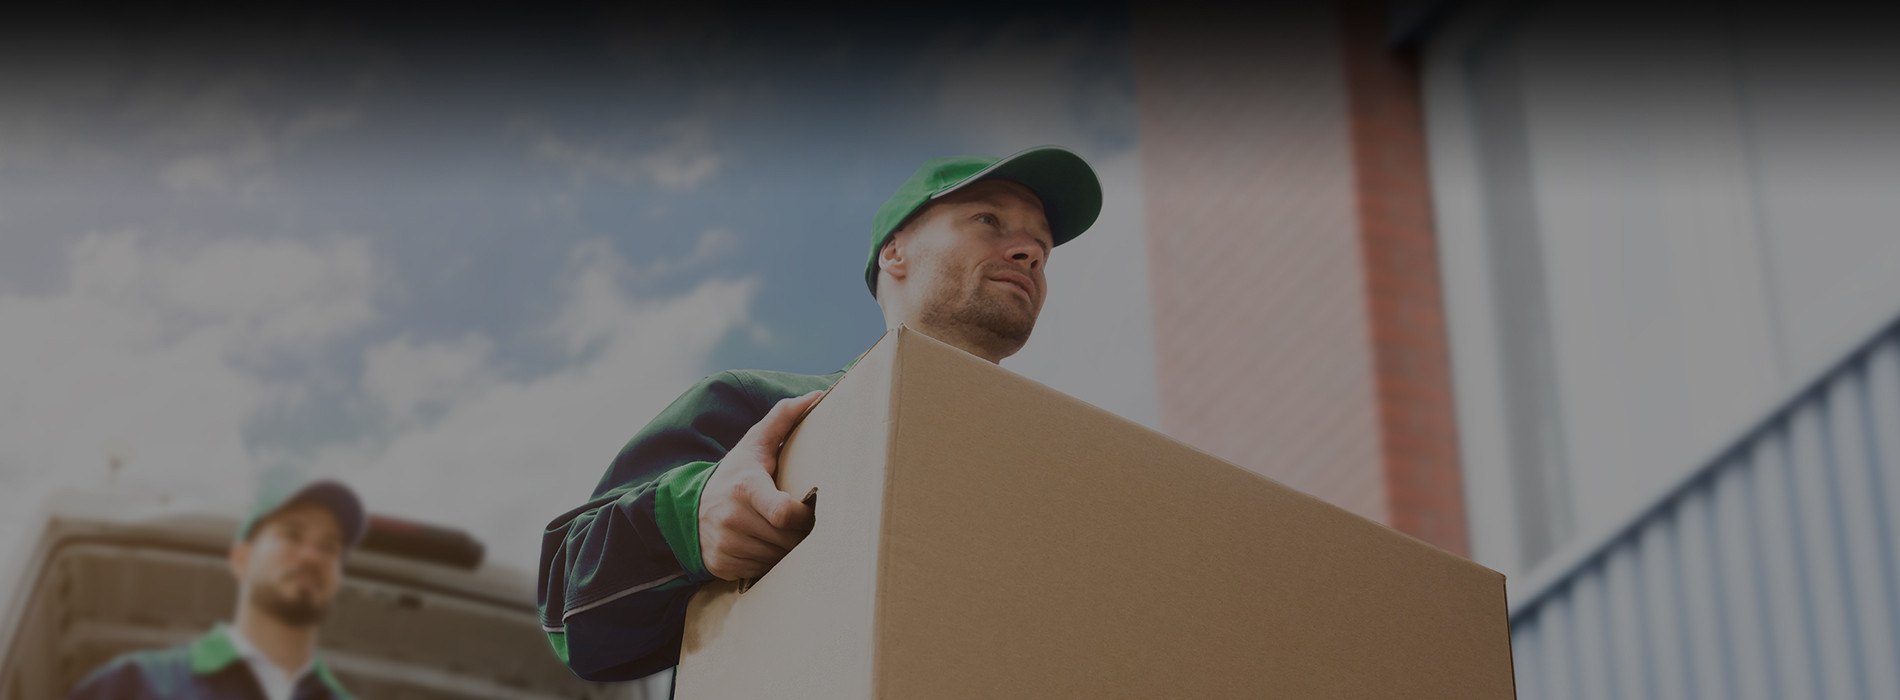 Moving company in Los Angeles